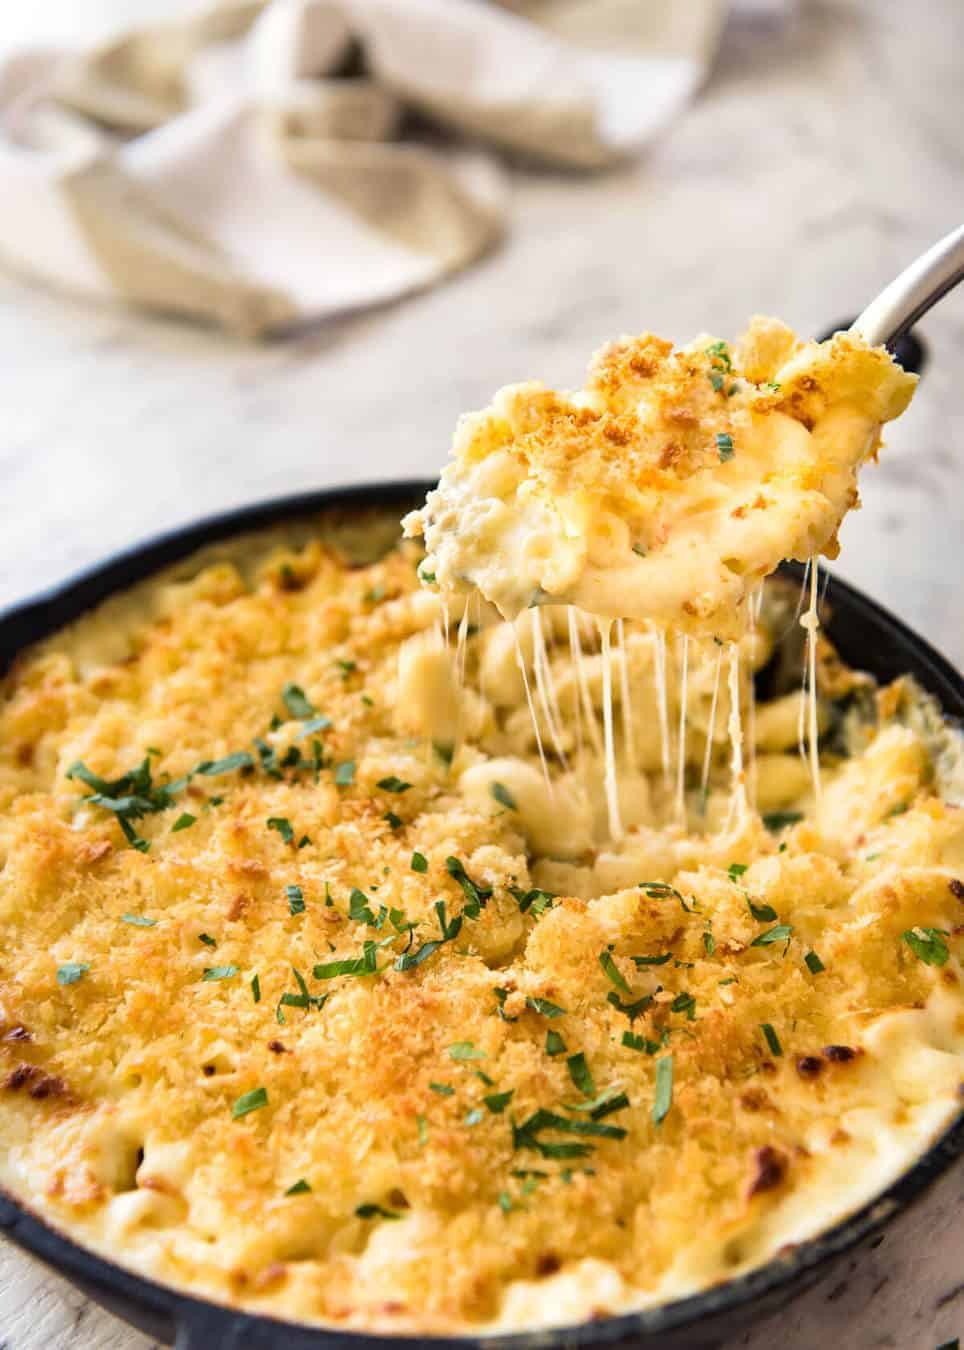 Make Baked Macaroni And Cheese
 Baked Mac and Cheese